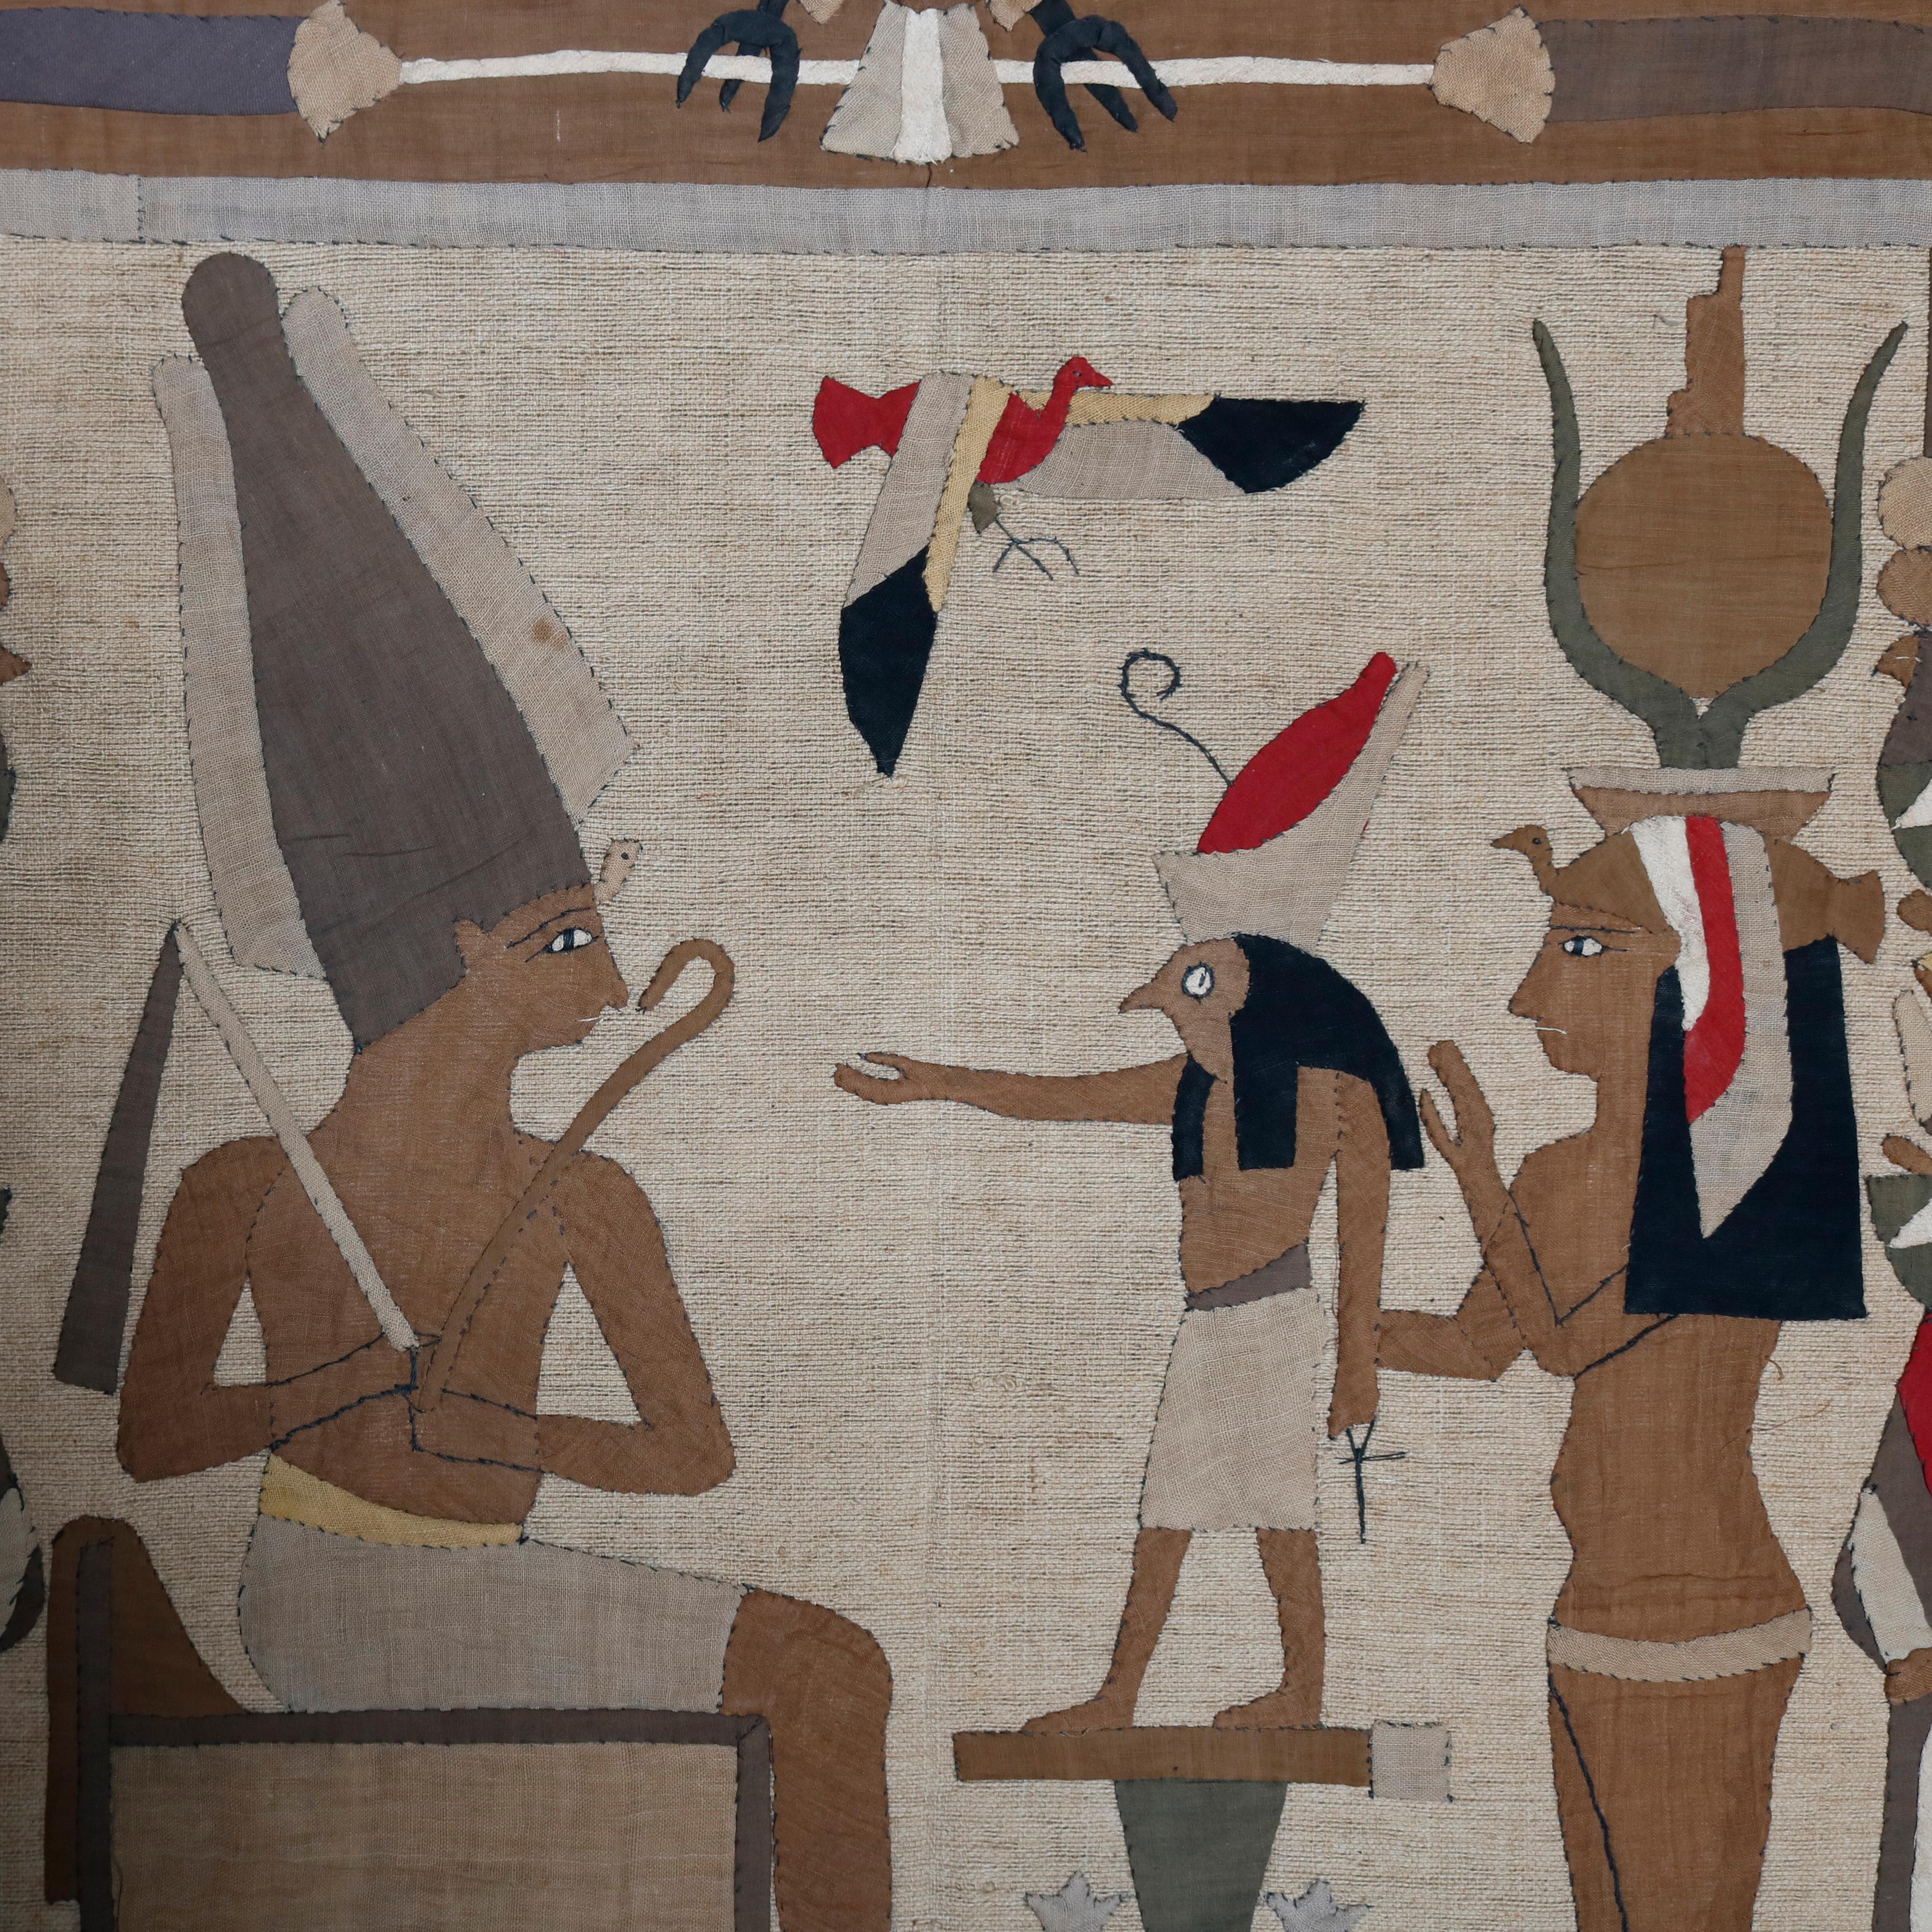 An antique Egypt Revival wall tapestry offers scene with figures making offering to king with birds and stylized flowers, circa 1920

***DELIVERY NOTICE – Due to COVID-19 we are employing NO-CONTACT PRACTICES in the transfer of purchased items. 